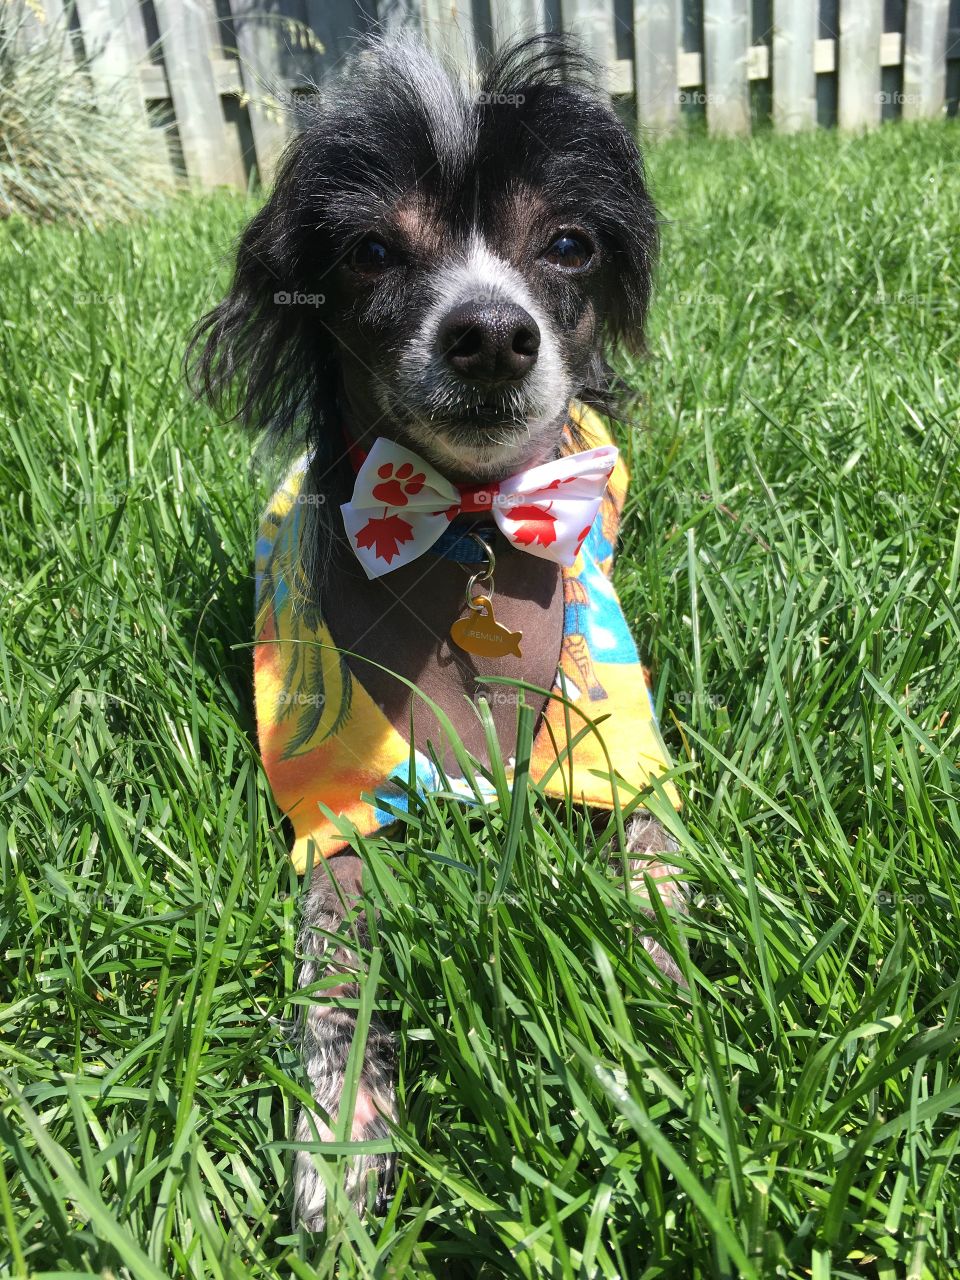 My rescue dog Gremlin. He is a Chinese Crested true hairless. He is wearing a Canada Day bow tie. He is black and white. Only has hair on his head, feet and tail.